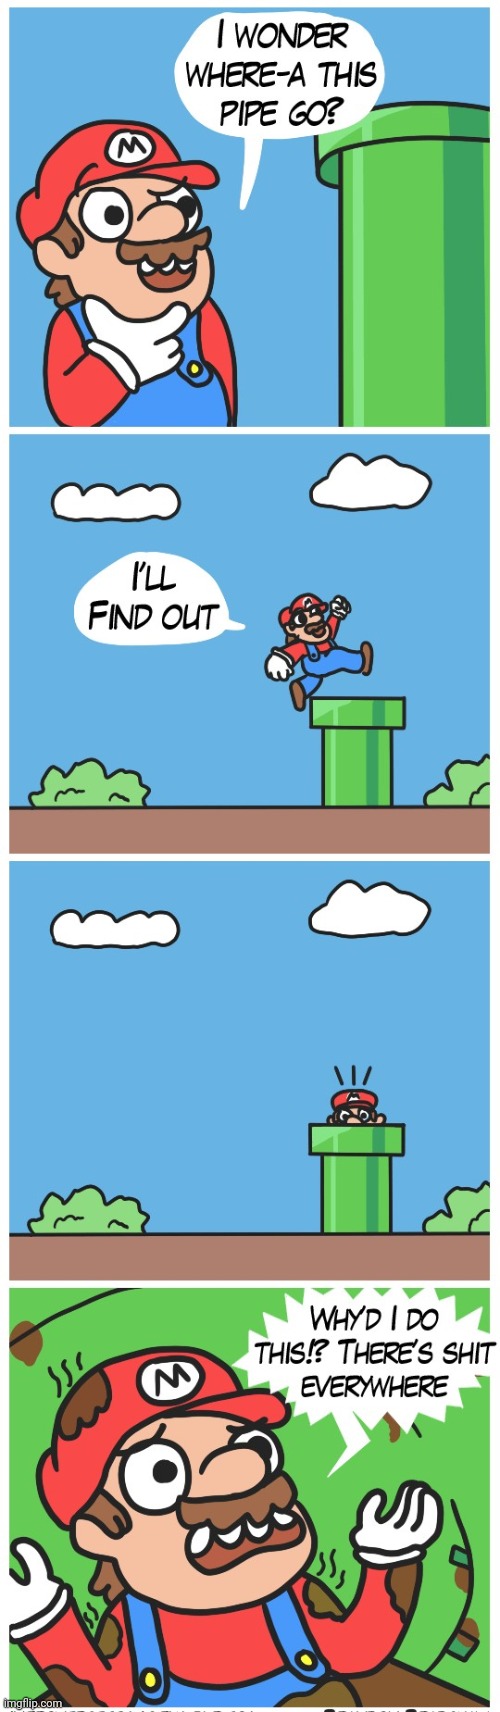 AND HE'S SUPPOSED TO BE A PLUMBER? | image tagged in super mario bros,super mario,comics/cartoons | made w/ Imgflip meme maker